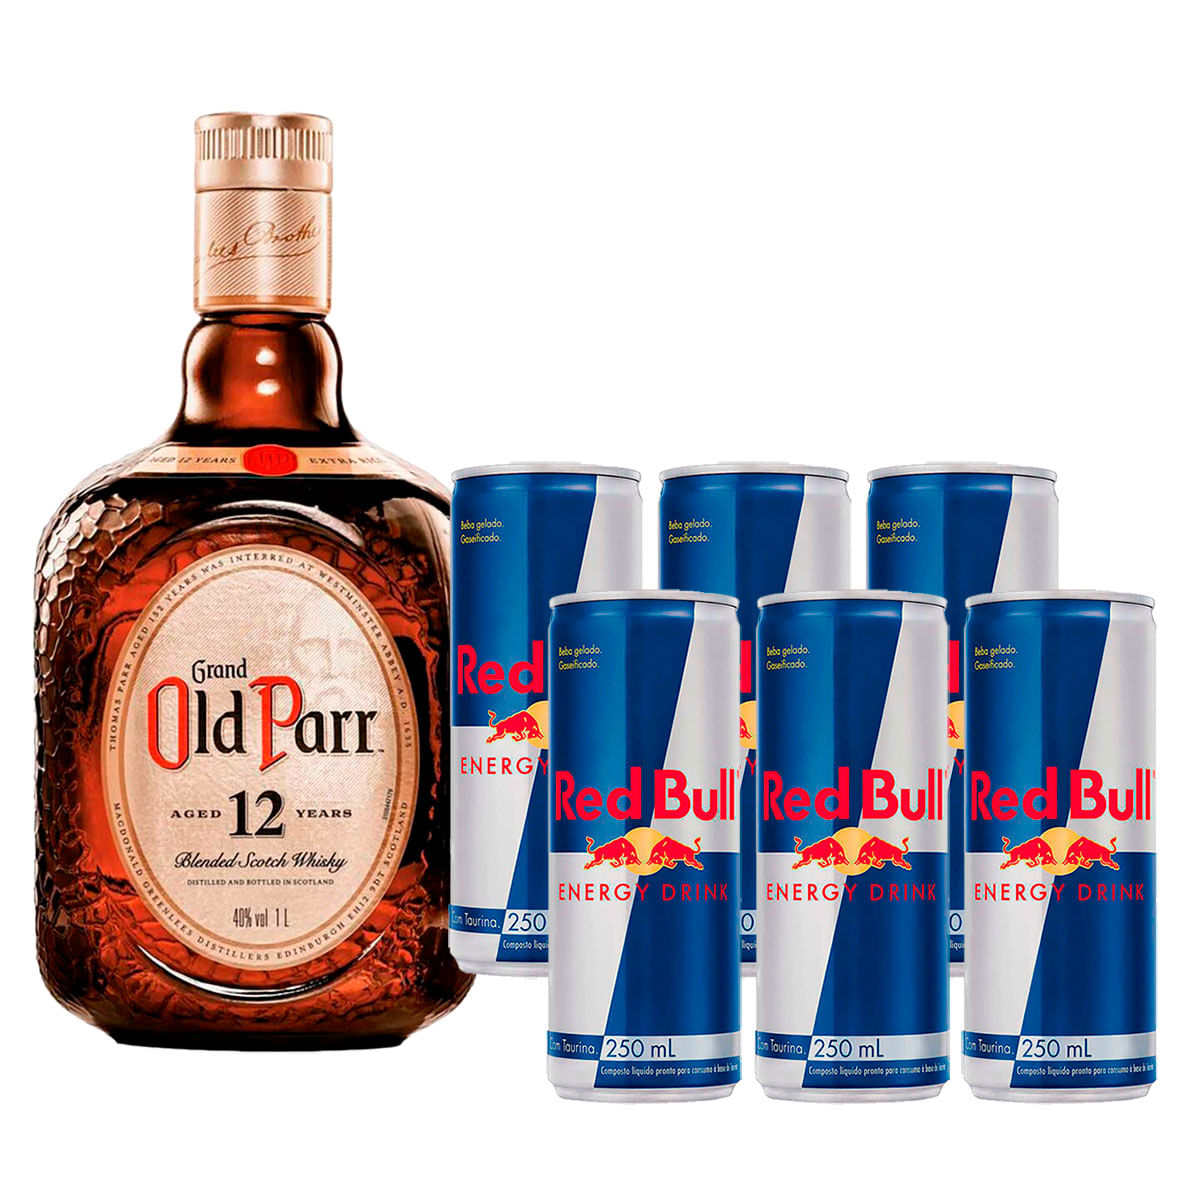 whisky-old-parr-1l---energetico-red-bull-energy-drink-250ml-pack-com-6-unidades-1.jpg